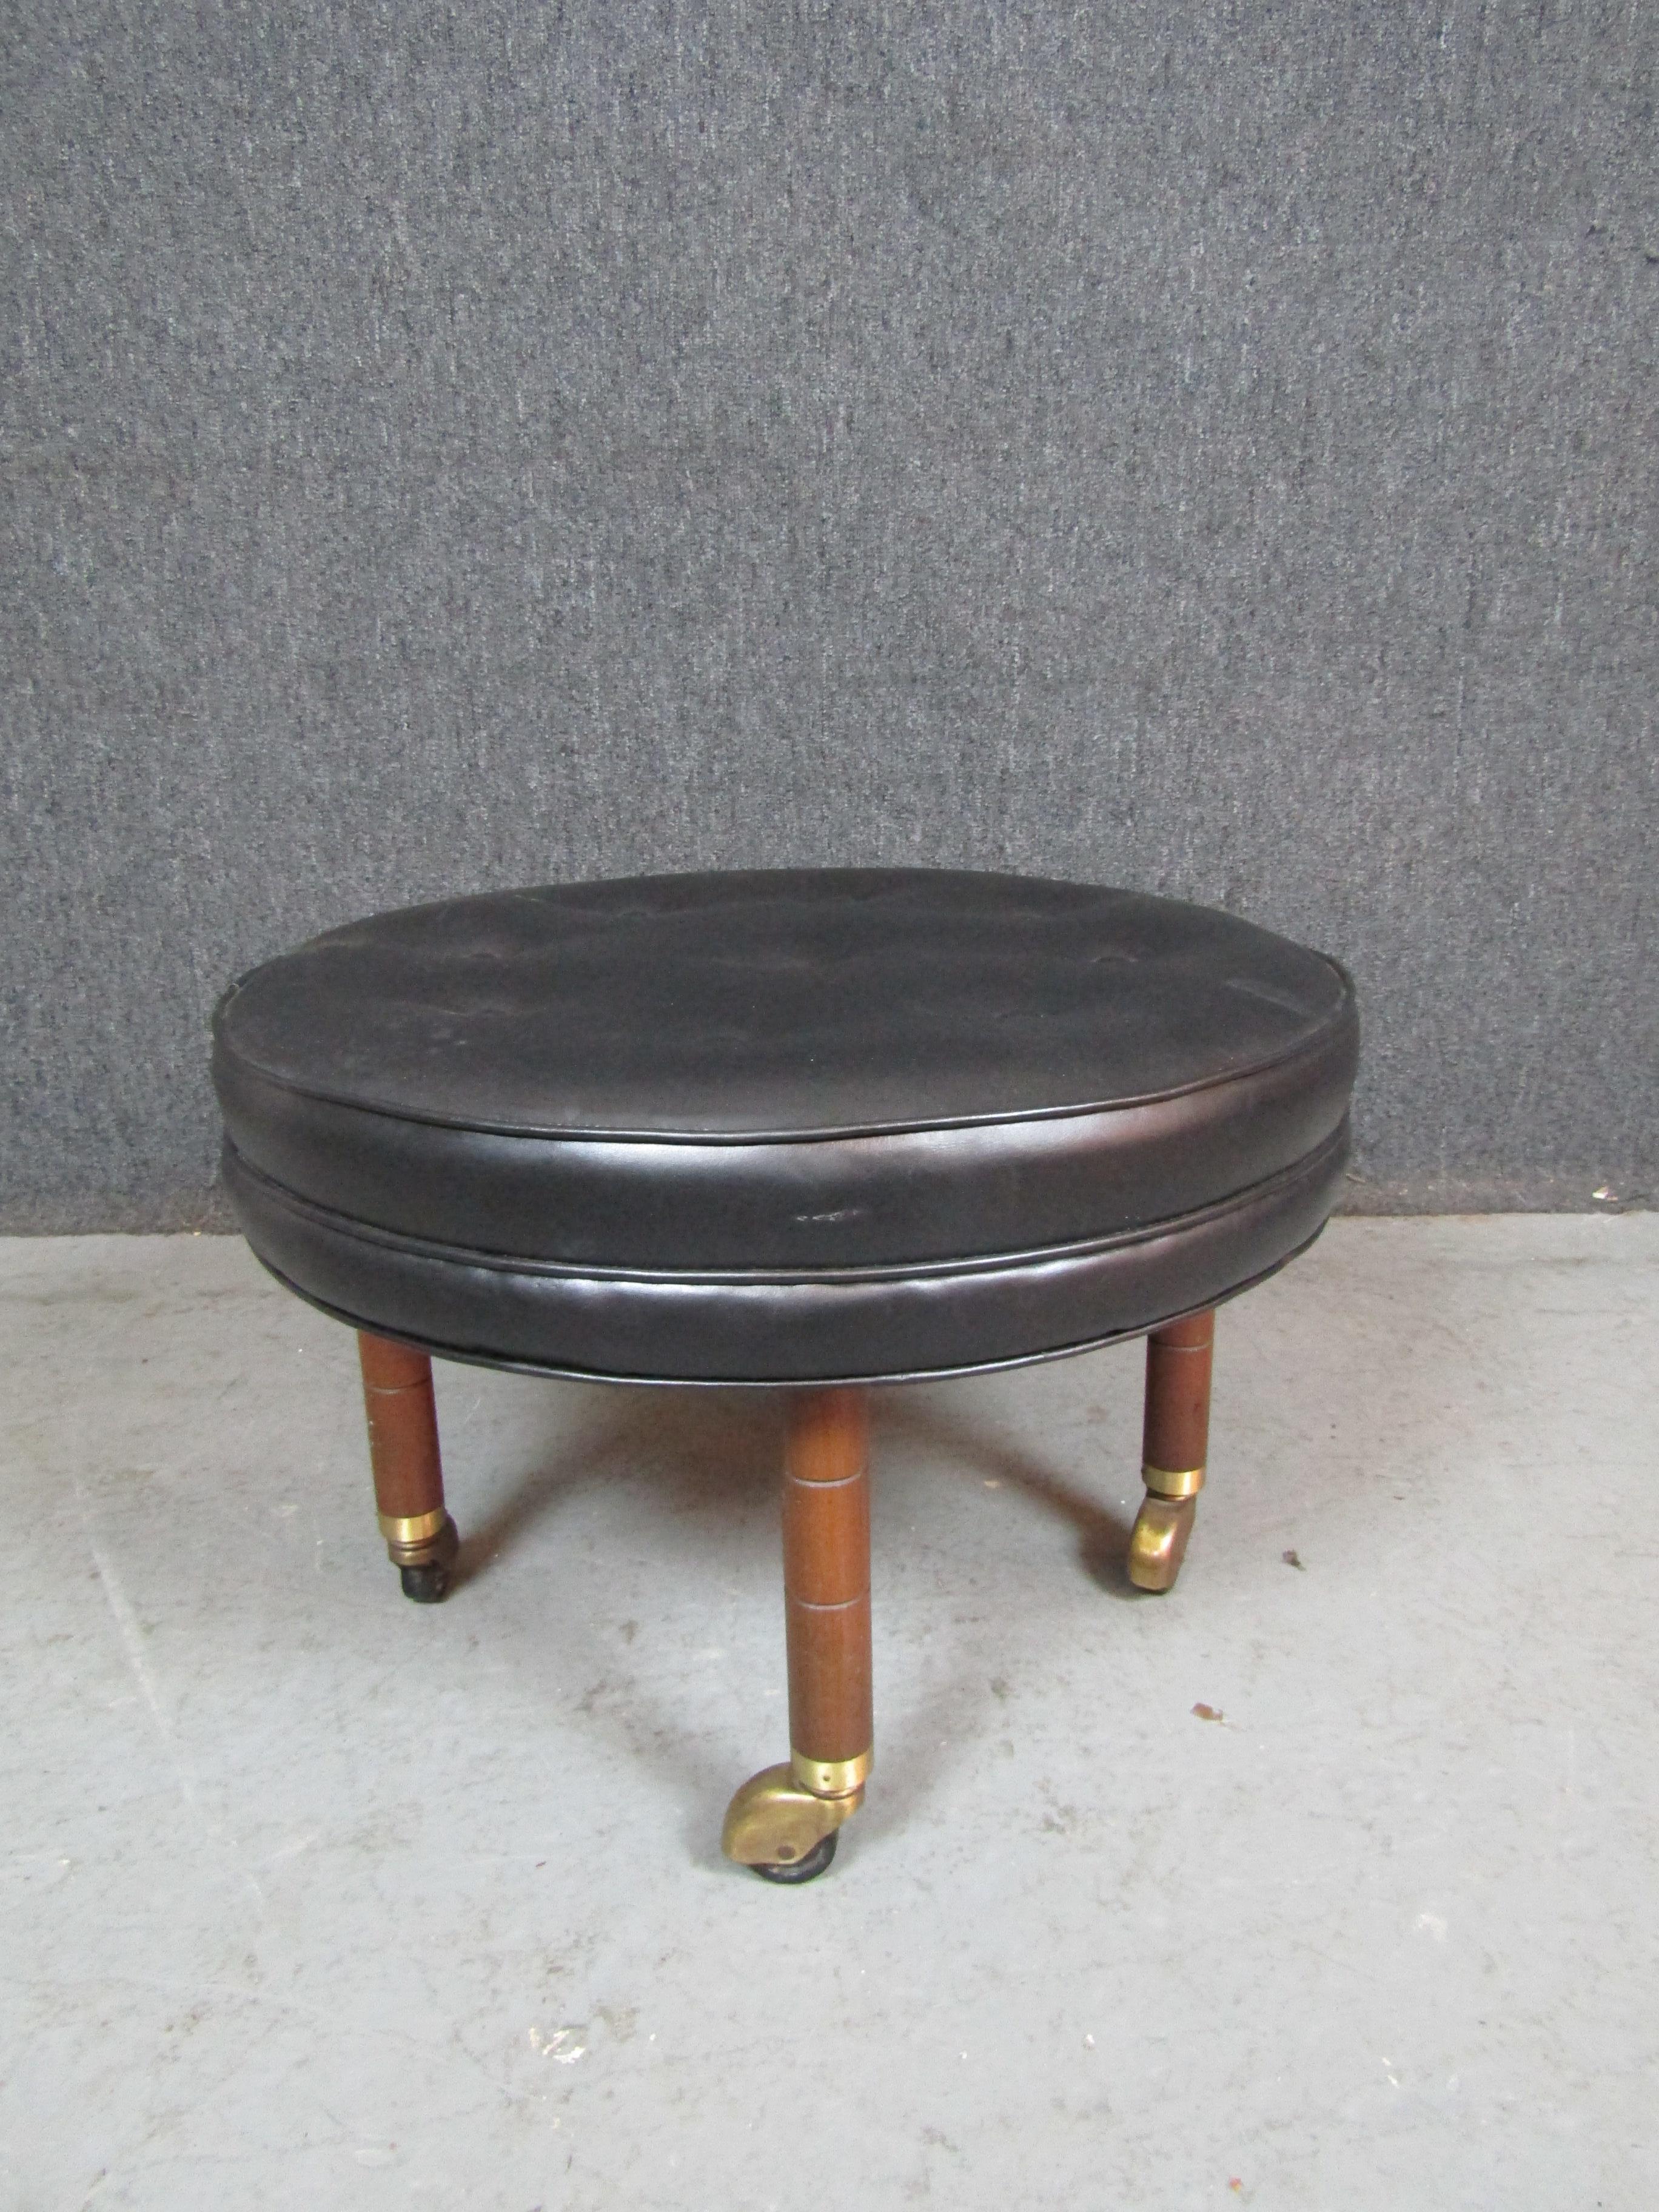 Give your home decor a spin with this charming rolling ottoman from the American craftsmen of Baker Furniture Co. Featuring a wonderful tufted leather cushion and lovely brass casters, this stool is a stunning blend of traditional and modern